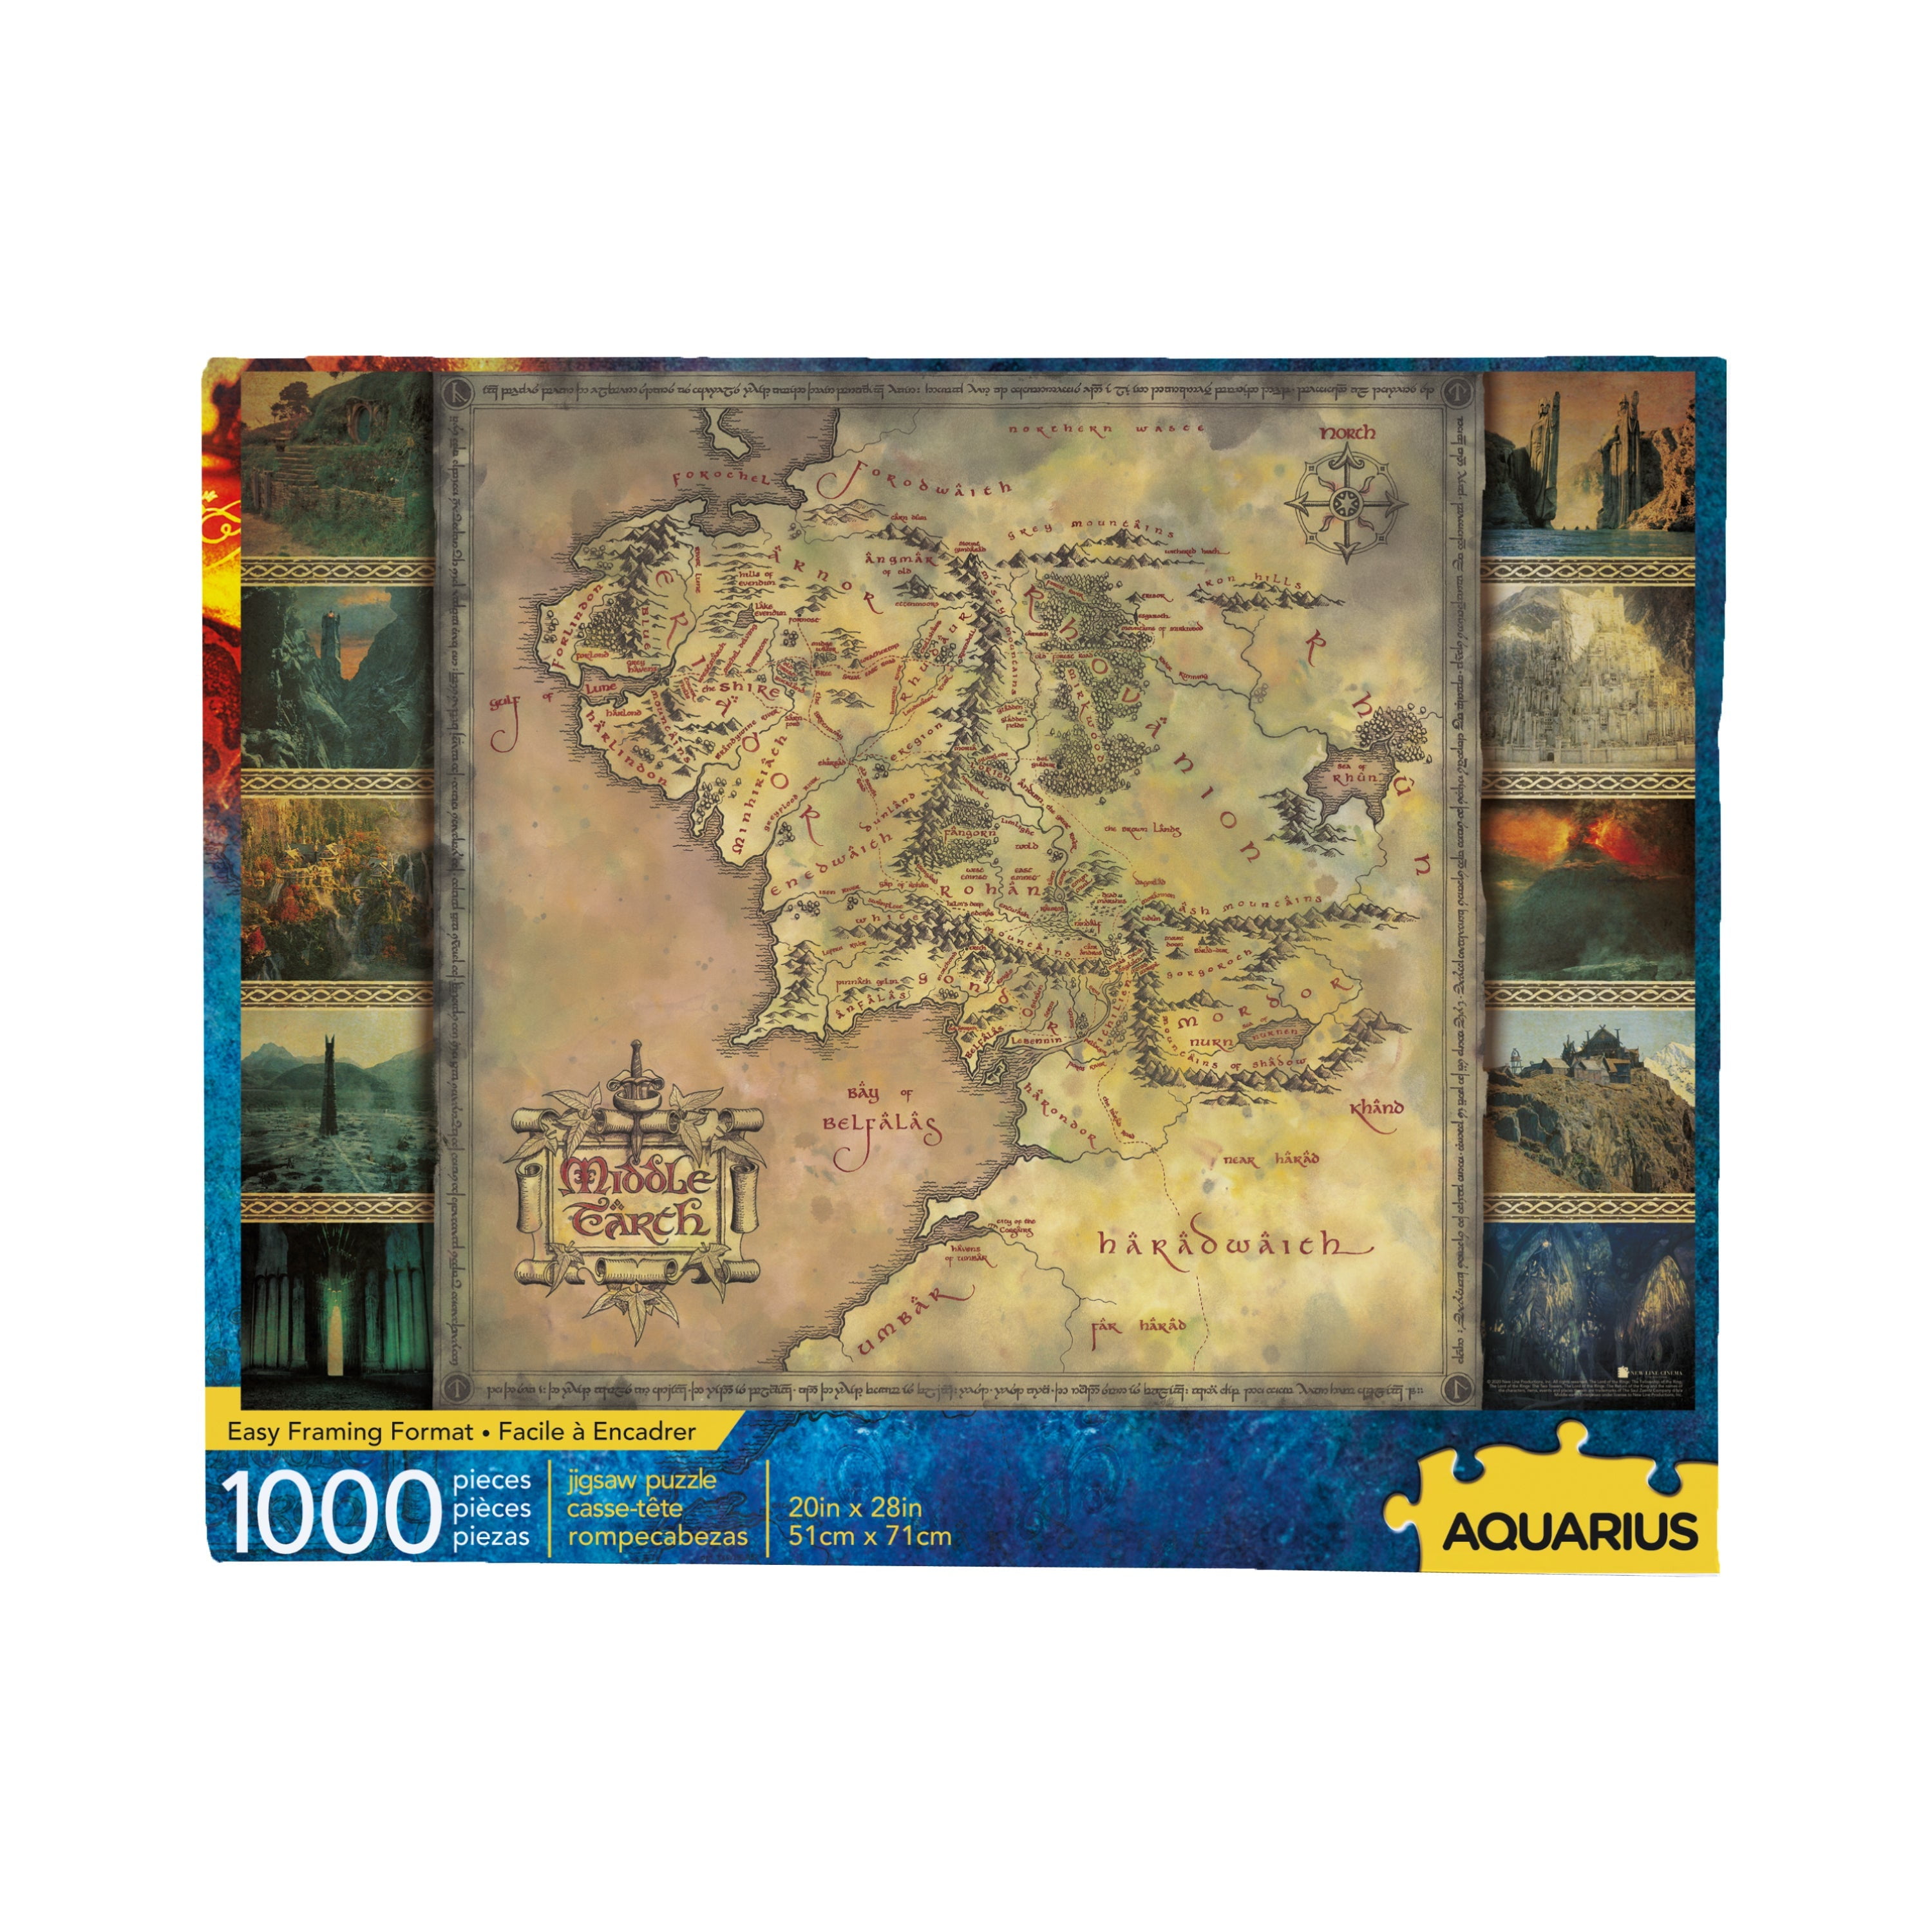 Lord of the Rings Map 1000 Piece Jigsaw Puzzle 